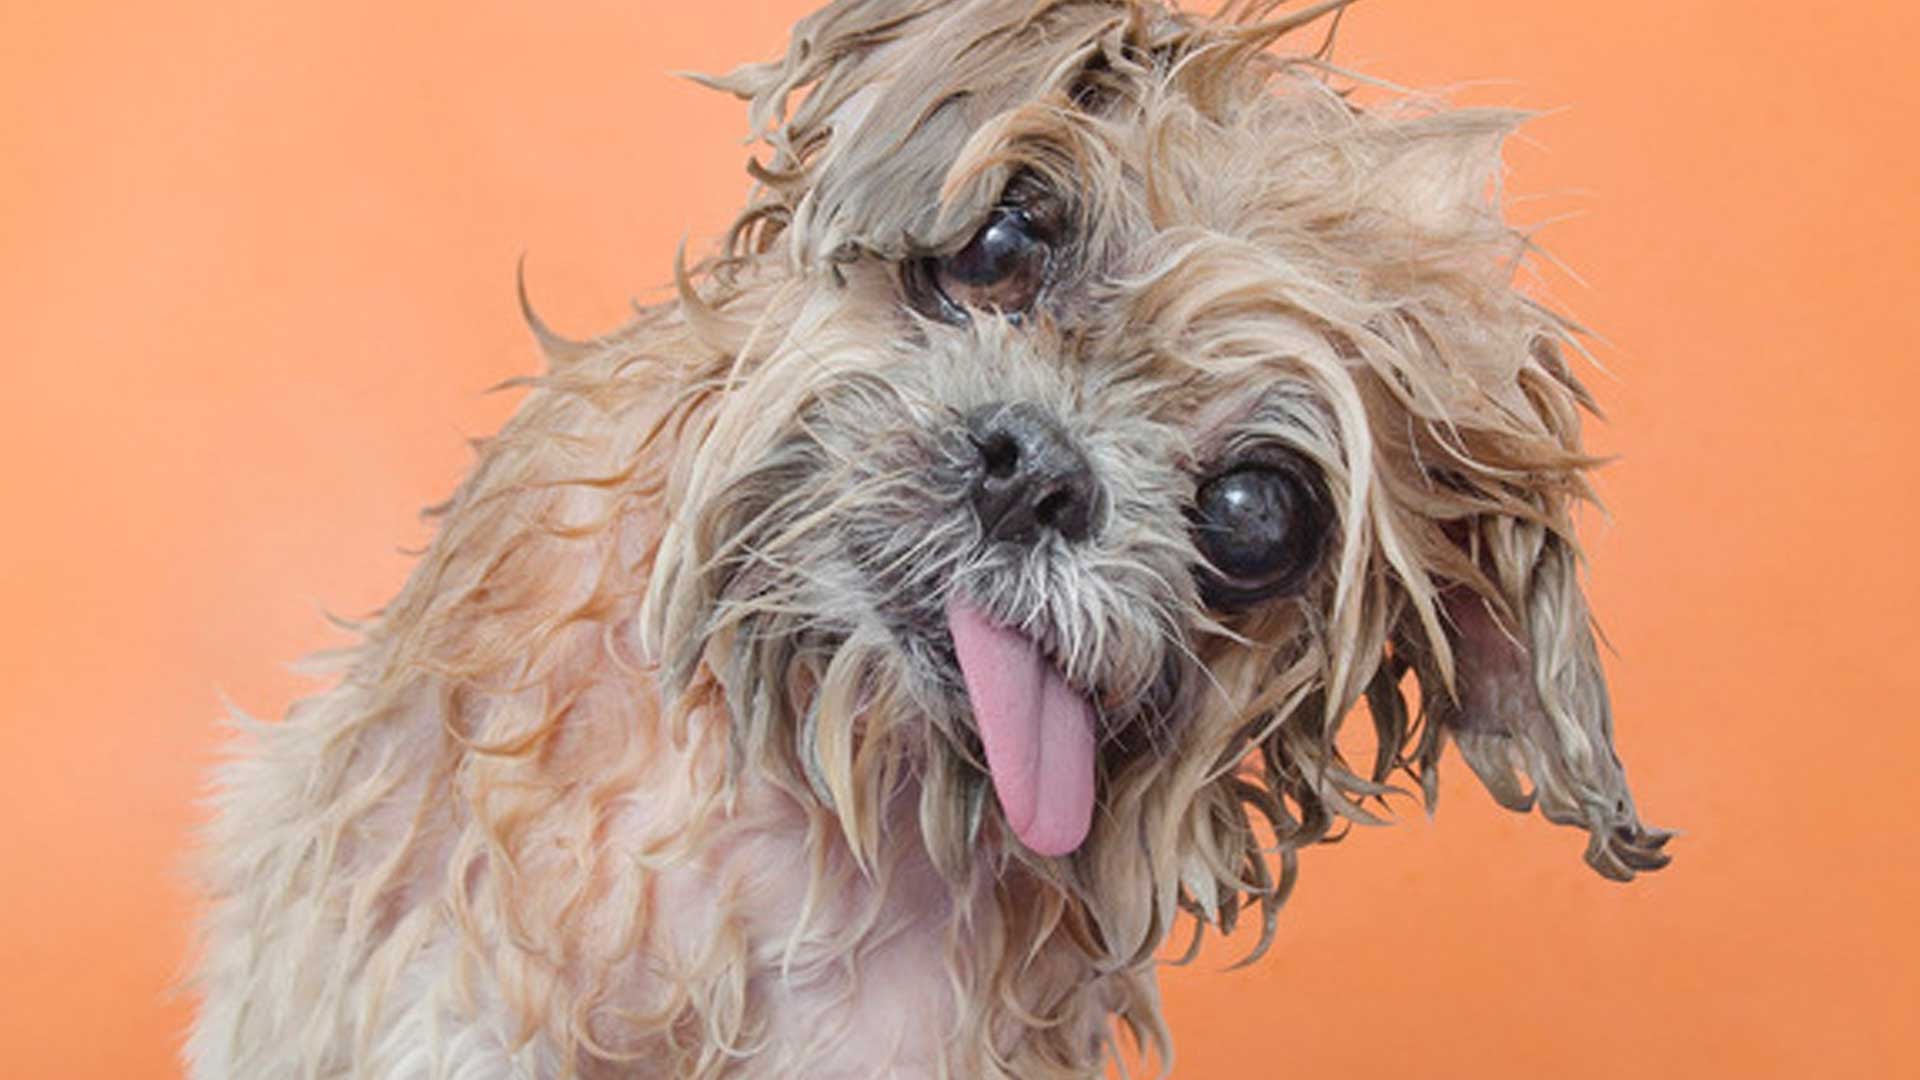 Adorable Wet Dogs You Can't Get Enough Of - YouTube